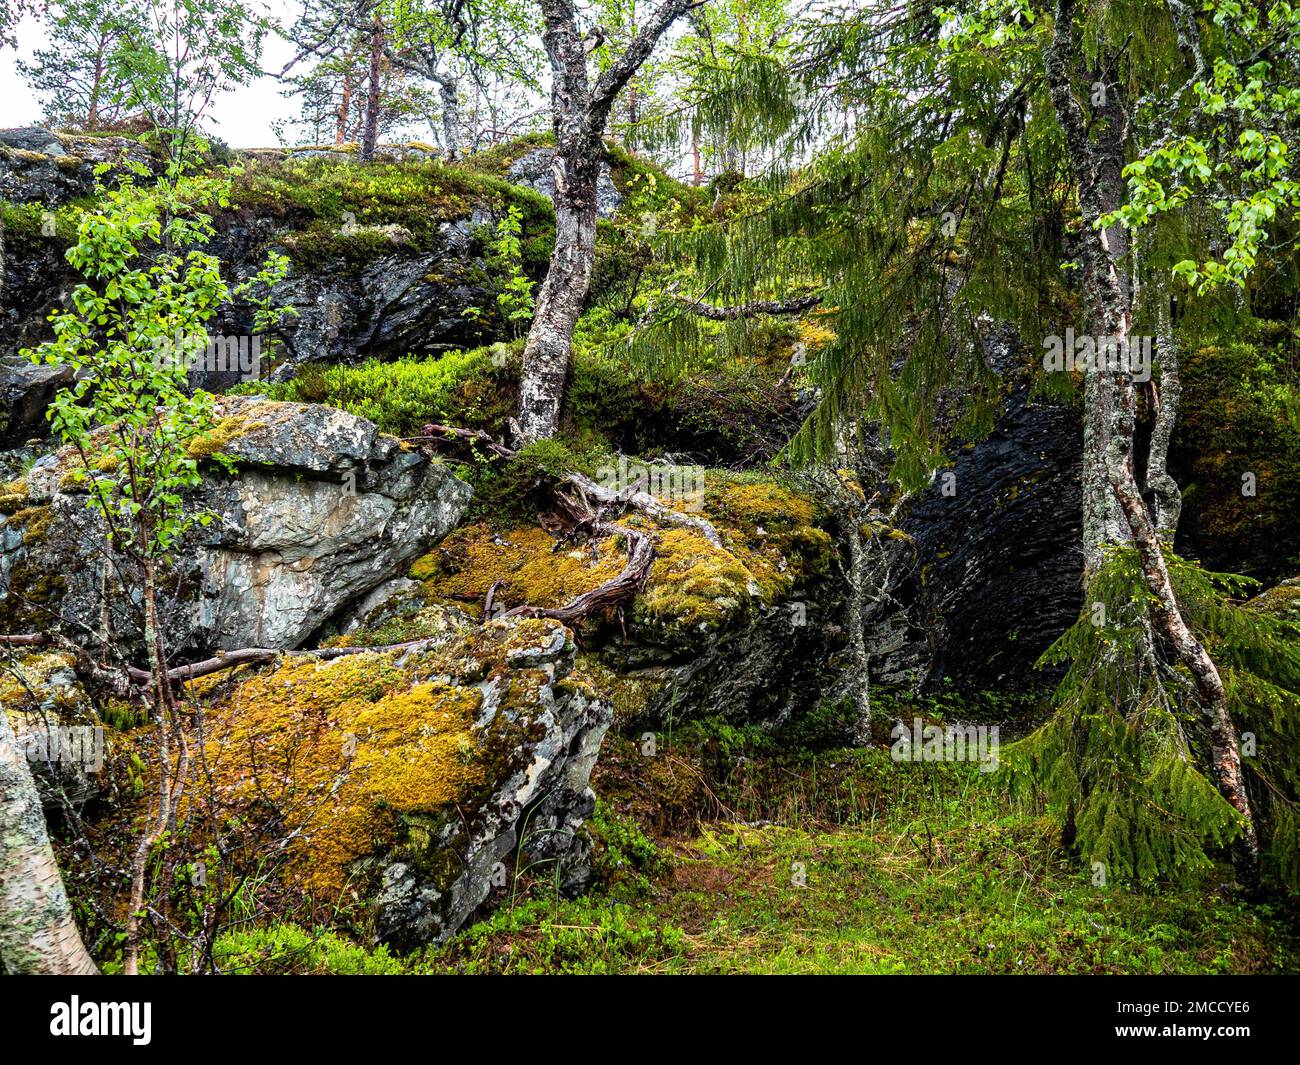 June 15, 2022, Close to the Norwerian-Swedish b, Nord-TrÃ¸ndelag, Norway: A view of trees growing on a rock wall. Nordic countries all boast unique landscapes that can only be found there, so it's no surprise that Scandinavian countries receive countless tourists all year round. Sweden also has more than a thousand miles of coastline. Everyone in Sweden can enjoy the forests, the mountains, the lakes, and the seaside because of the so-called everyman's Right. Far up in the North, the summers are particularly special because, for a few weeks, the sun doesn't set at all, still shining at midni Stock Photo